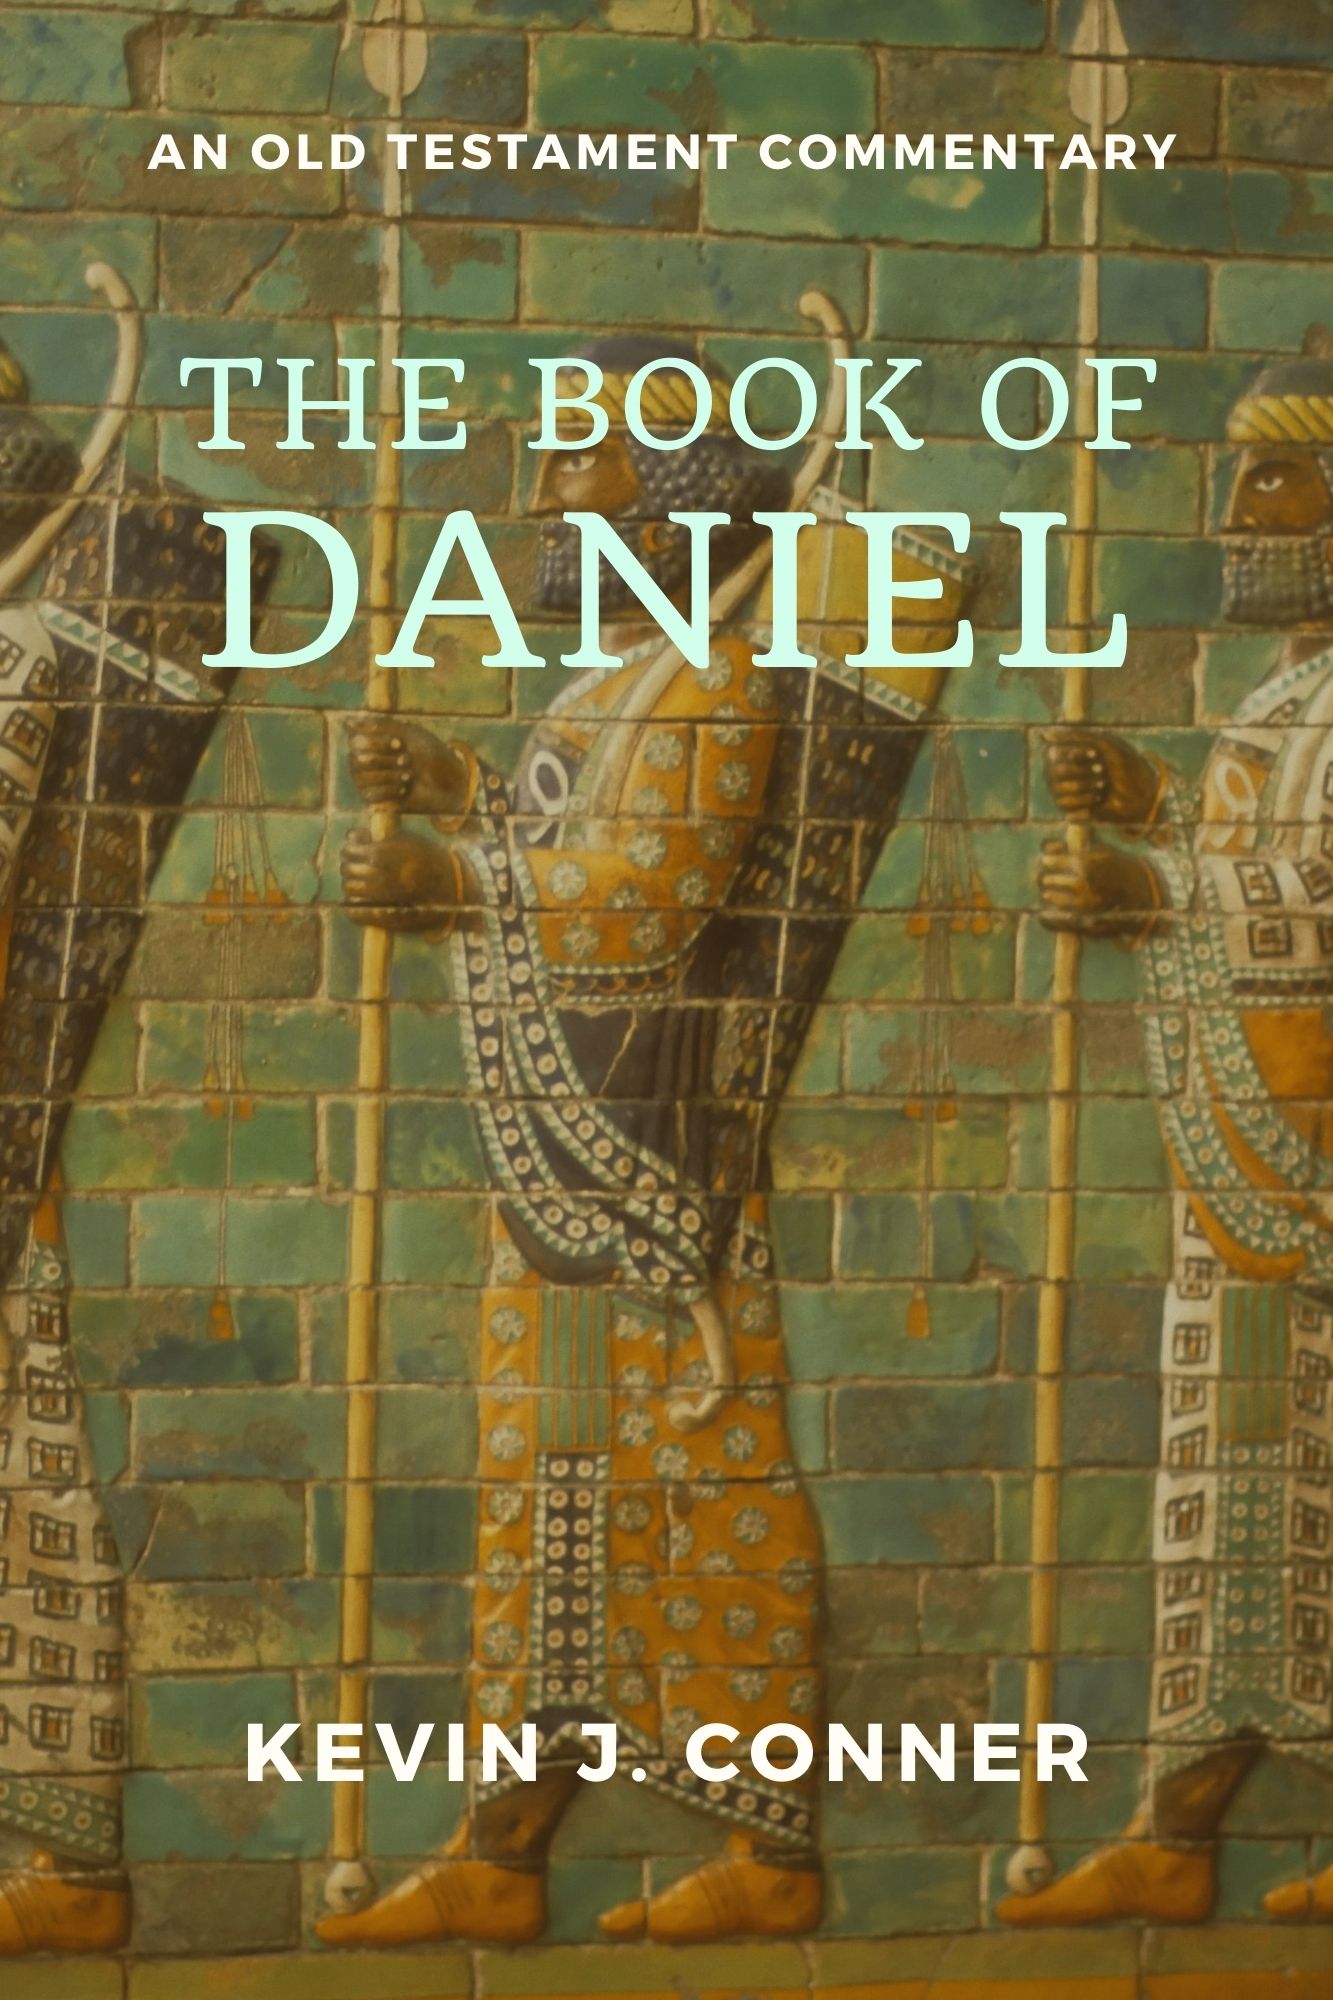 commentary on the book of daniel